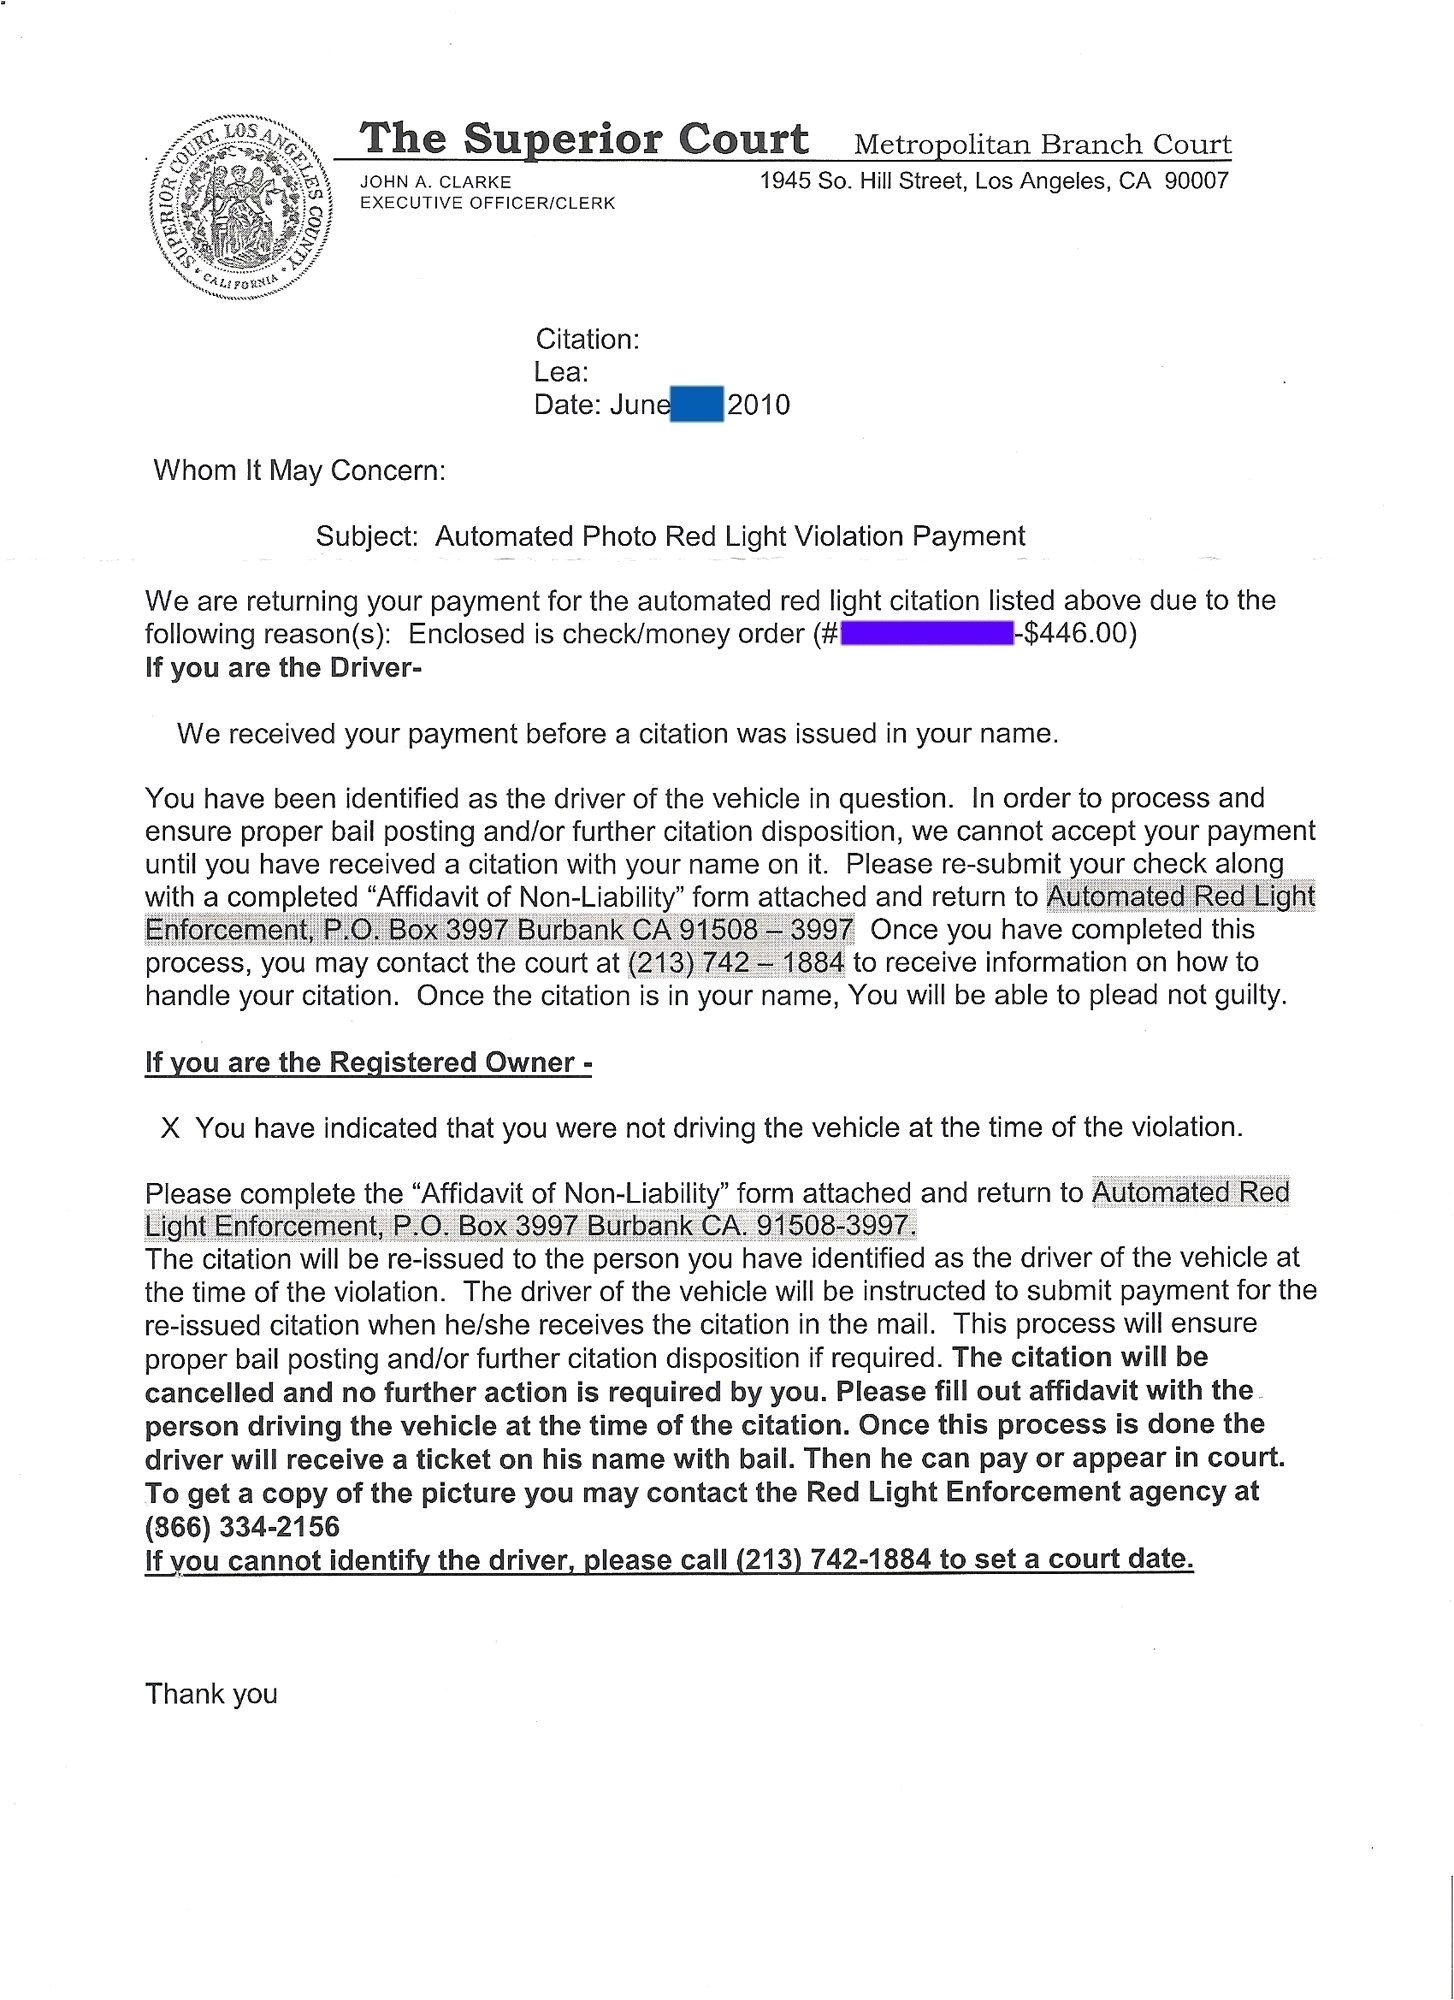 speeding ticket appeal letter template traffic ticket letter of explanation